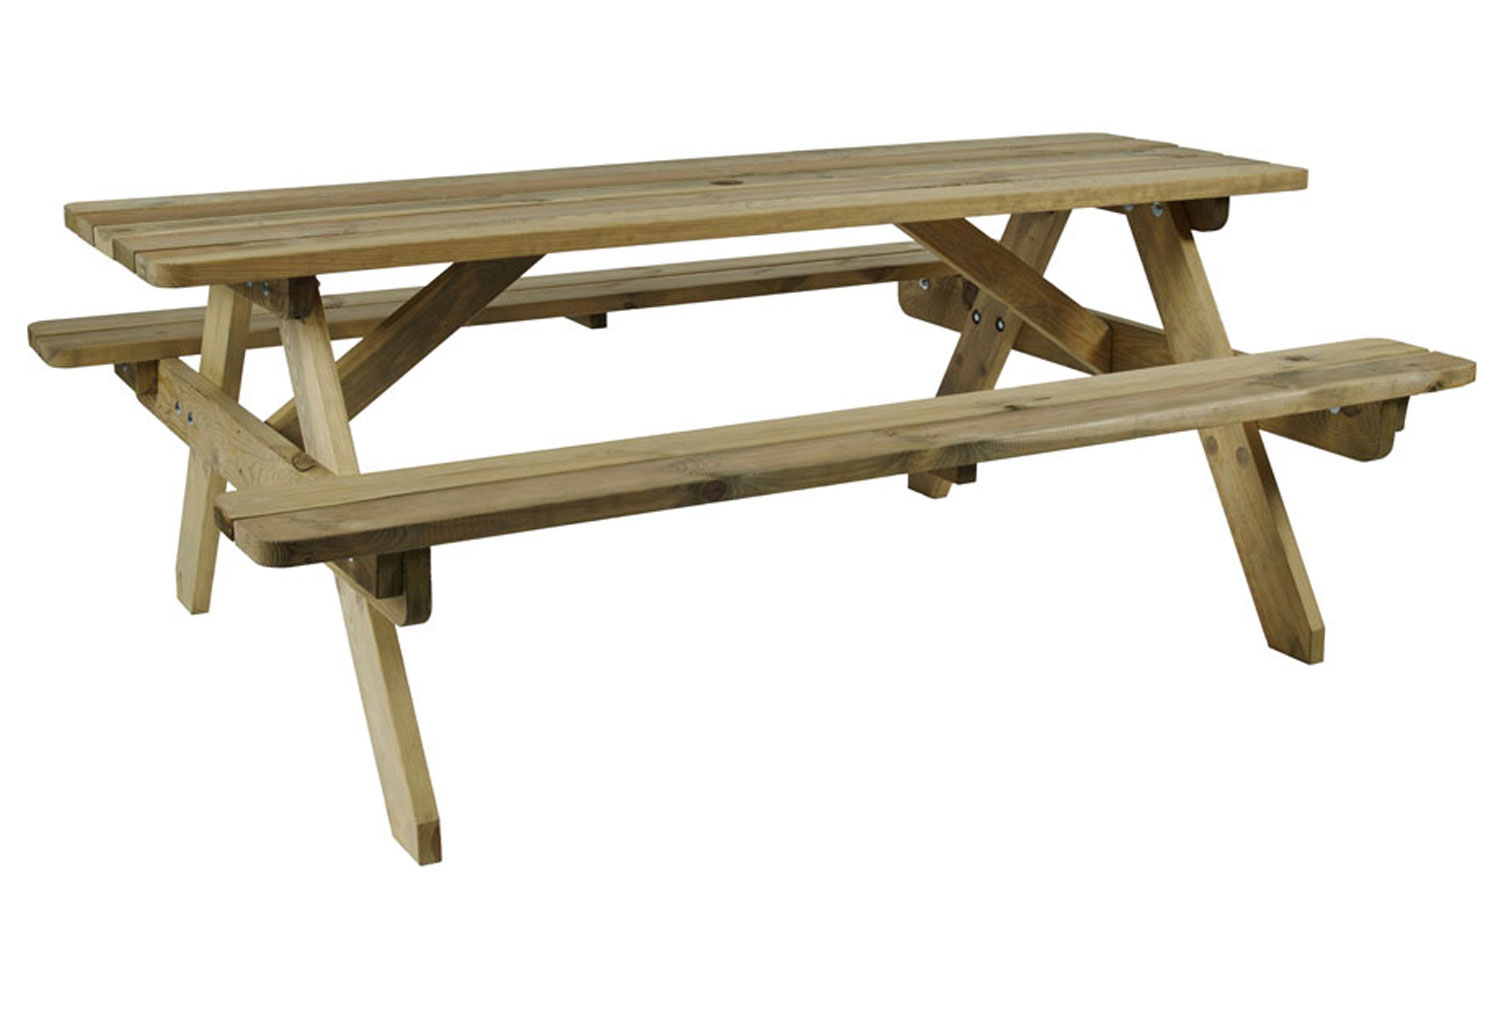 Qty 2 - Hexham Picnic Table, 6 Seater